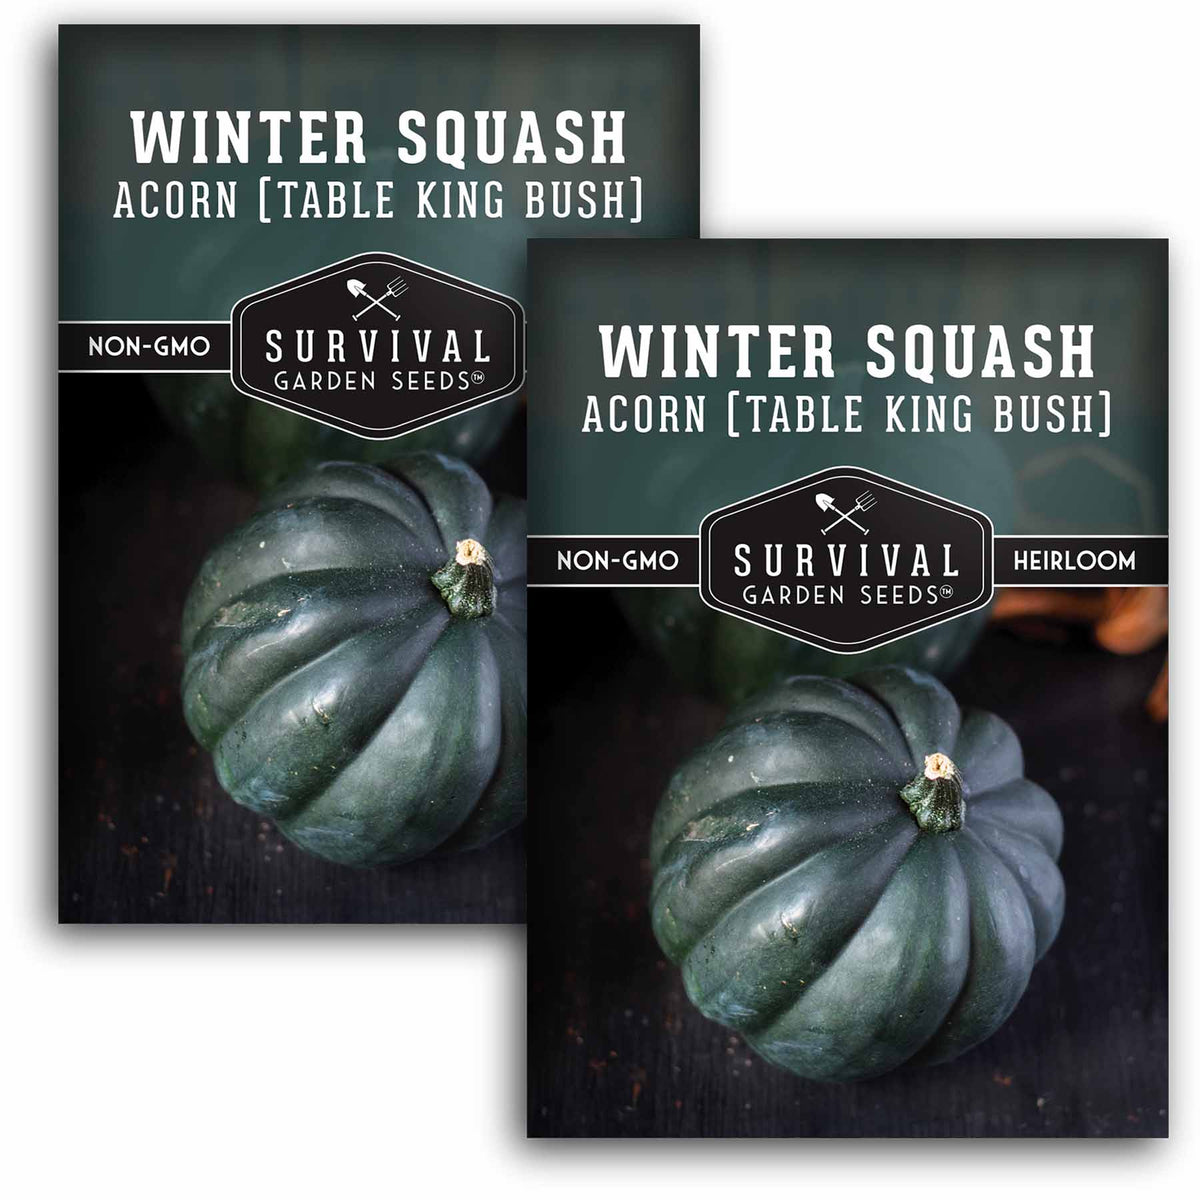 2 packets of Acorn Squash seeds